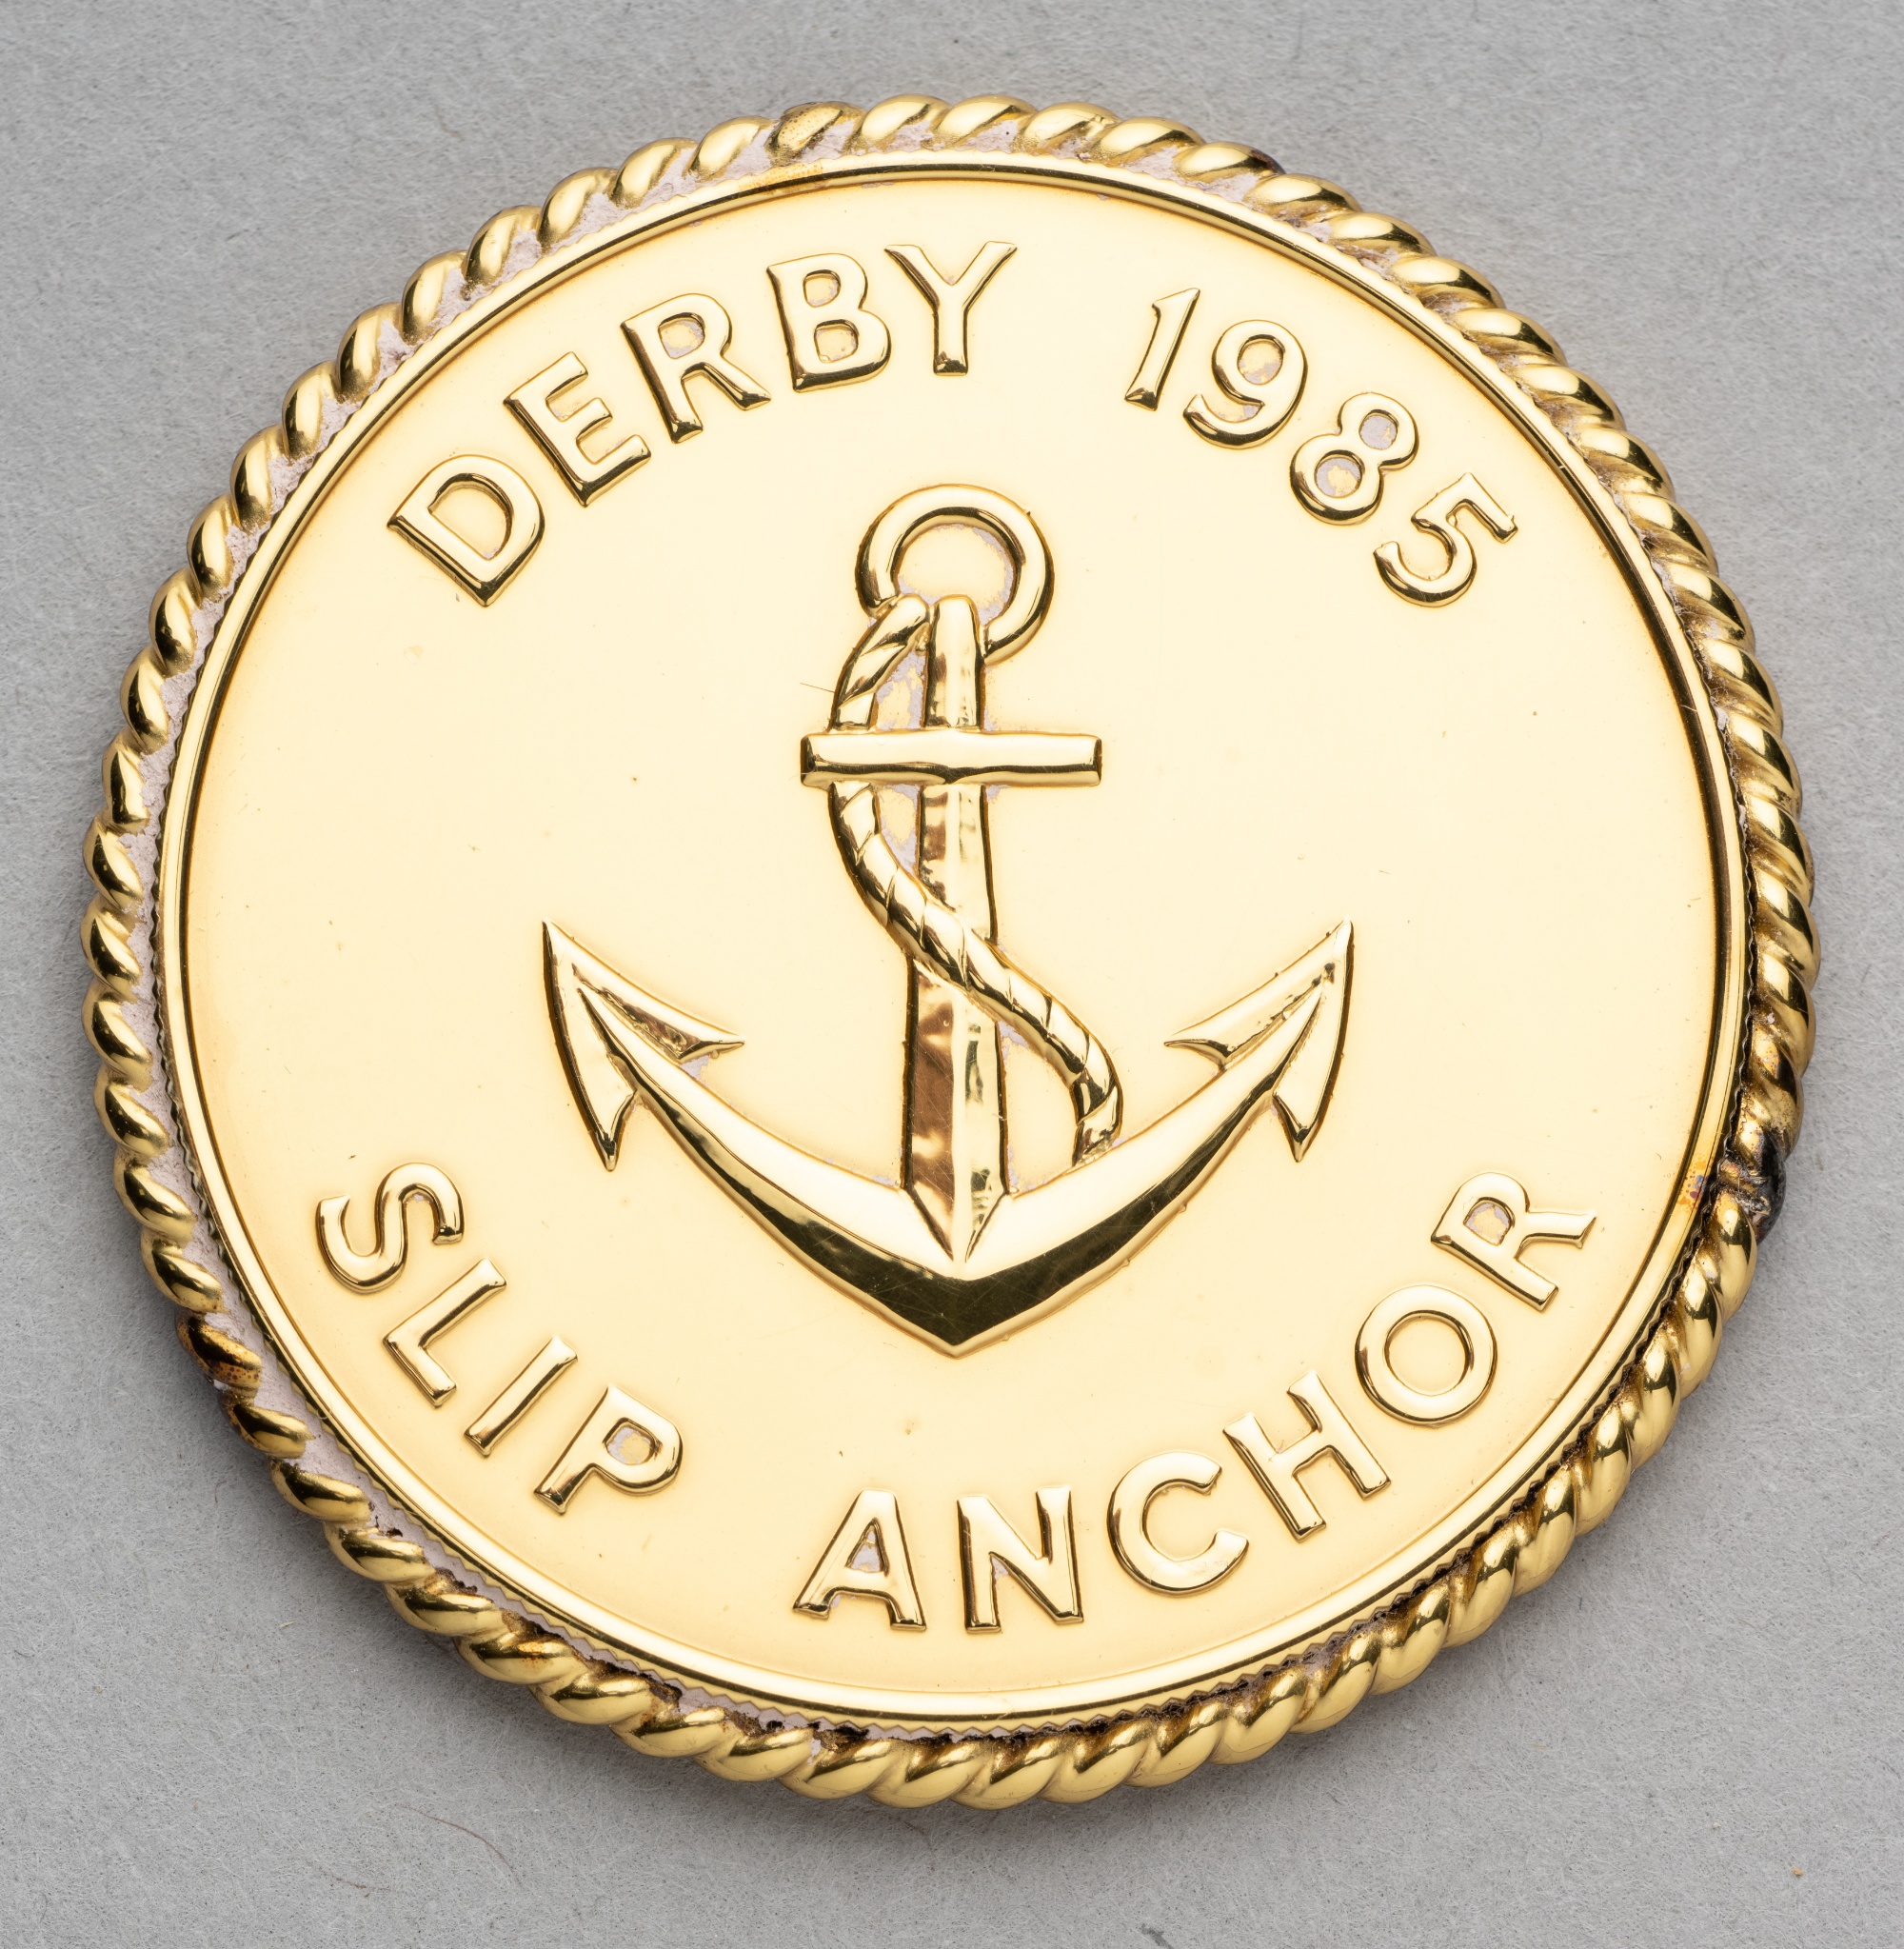 Medallion commemorating the victory of Lord Howard de Walden's 'Slip Anchor' in the 1985 Derby, gilt